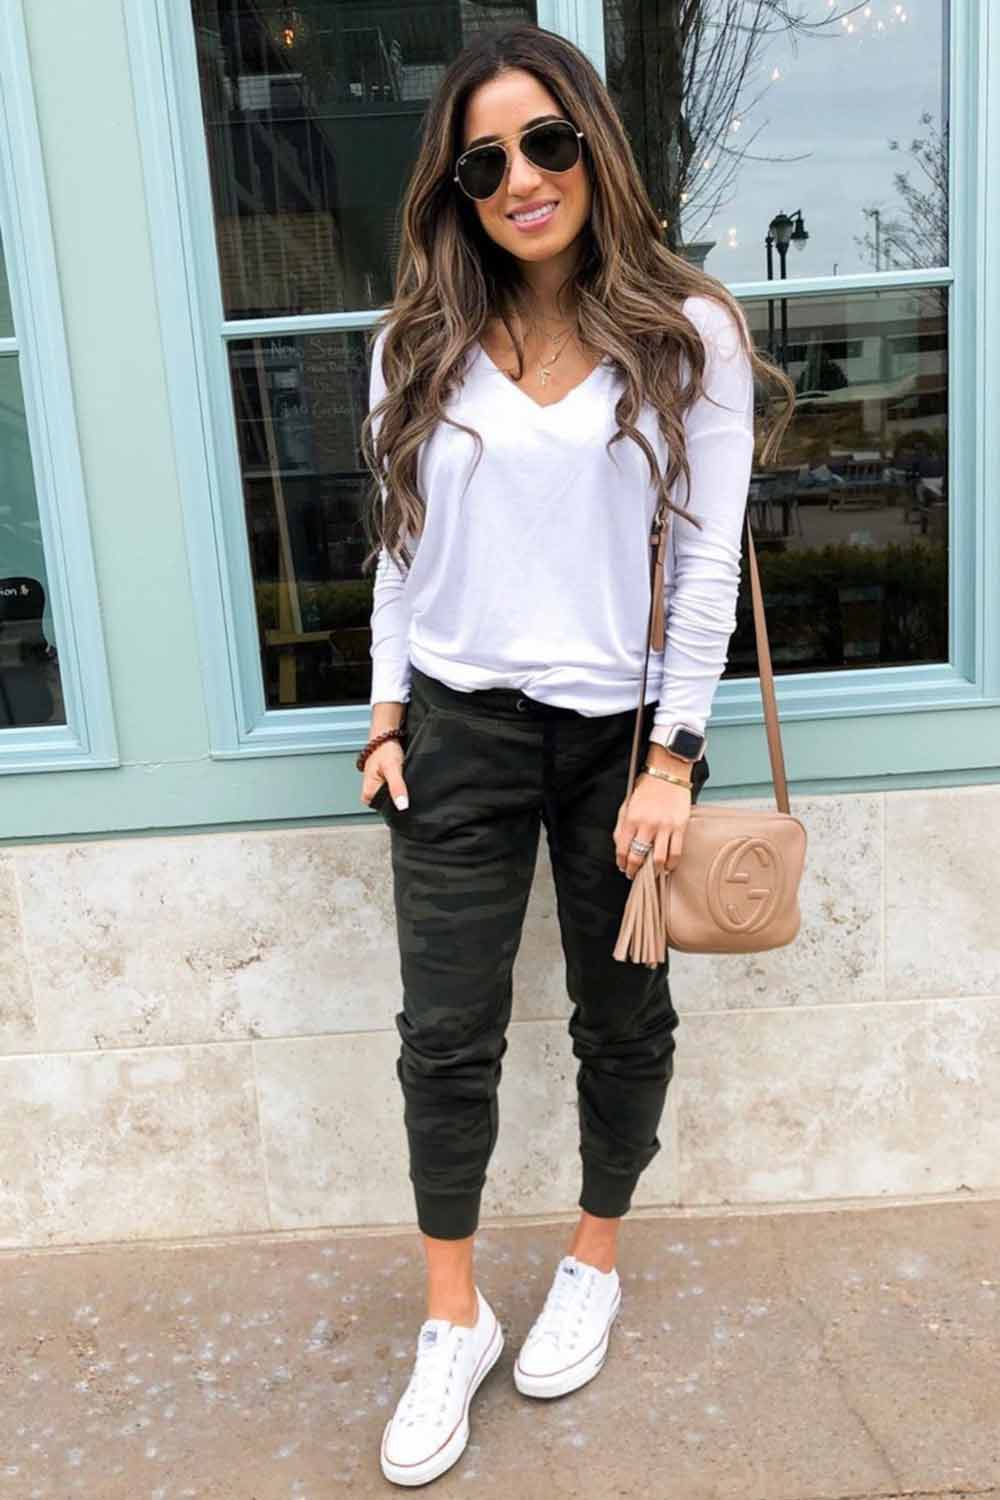 Camo Pants: Where and How To Wear the Stylish Item | Glaminati,com